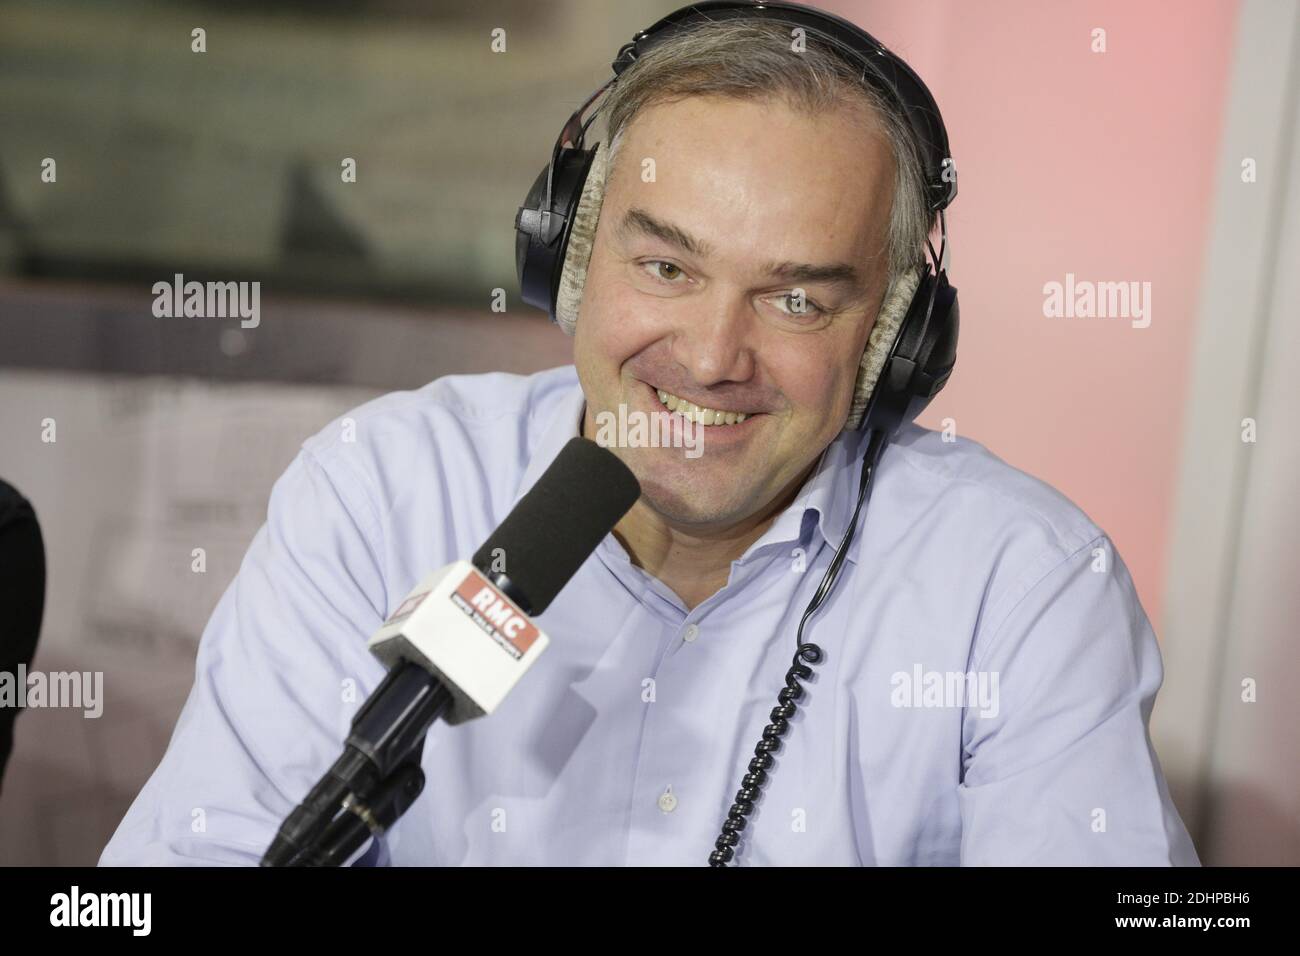 Exclusive - Olivier Truchot at the 'Les Grandes Gueules' talk show on RMC  Radio, in Paris, France, on February 18, 2016. Photo by Jerome  Domine/ABACAPRESS.COM Stock Photo - Alamy